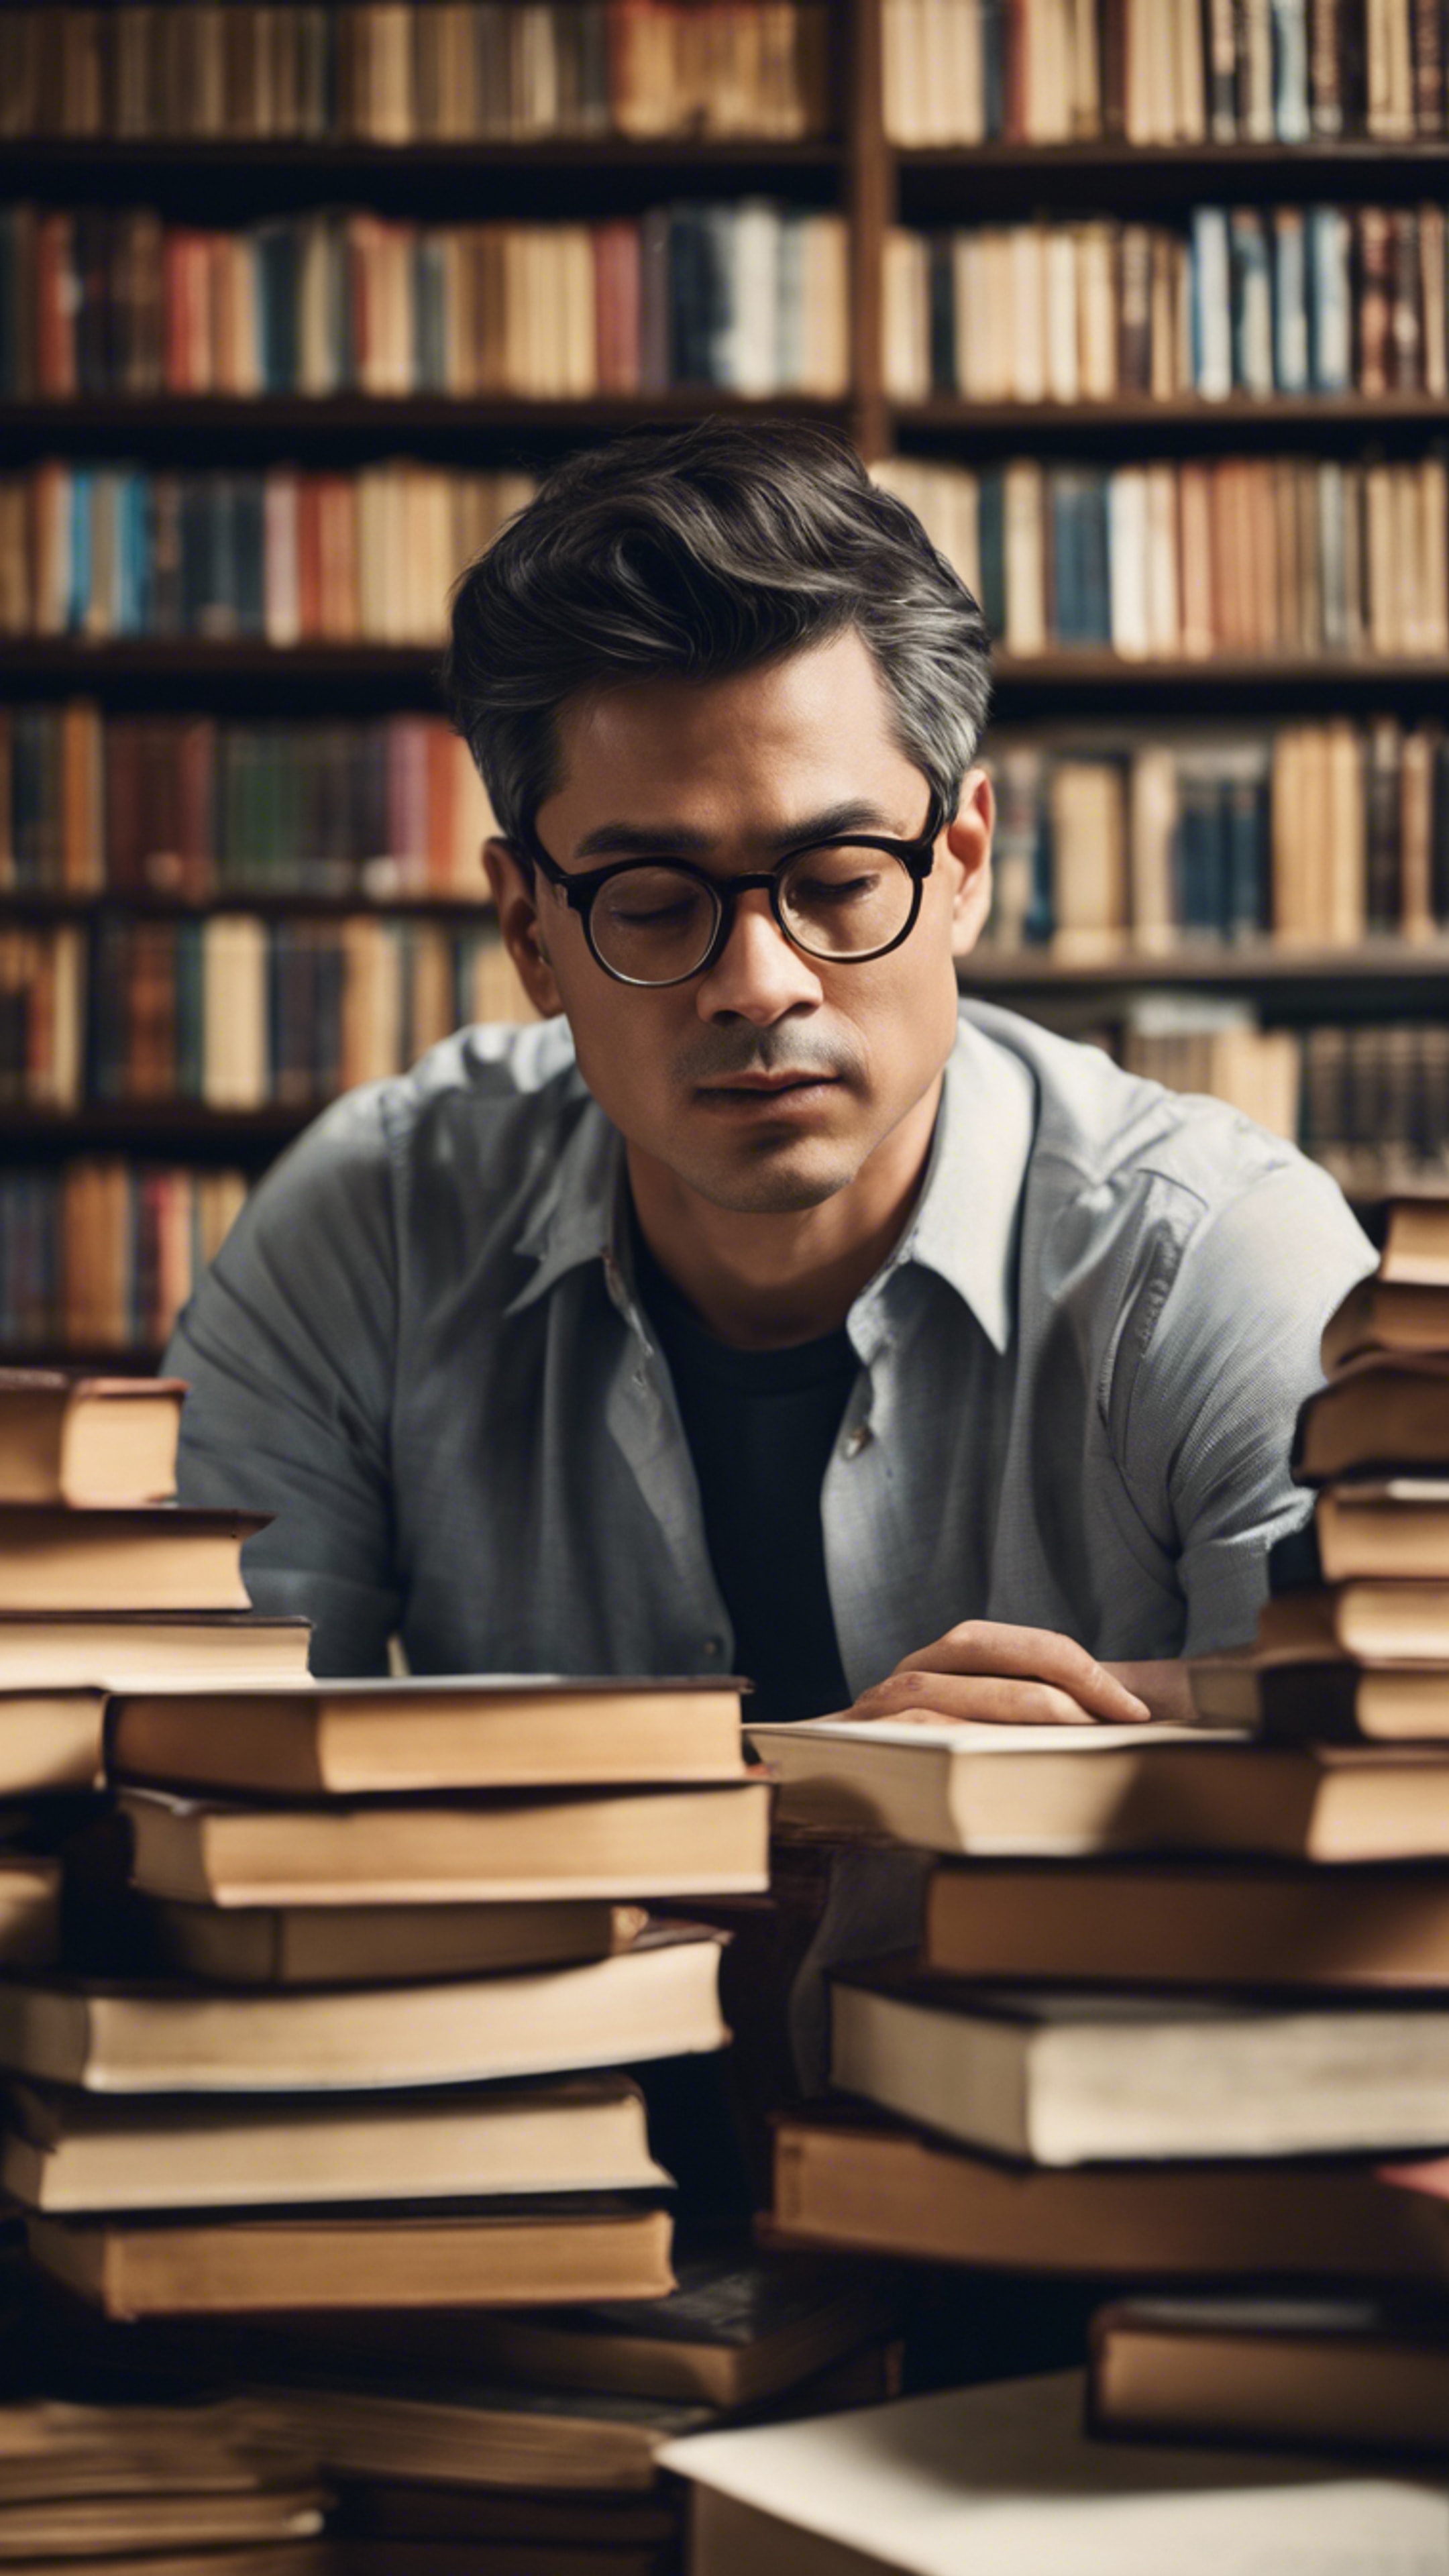 An intelligent man in glasses, deeply engrossed in his studies surrounded by stacks of books in a quiet library. 墙纸[88f4531613da45079a41]